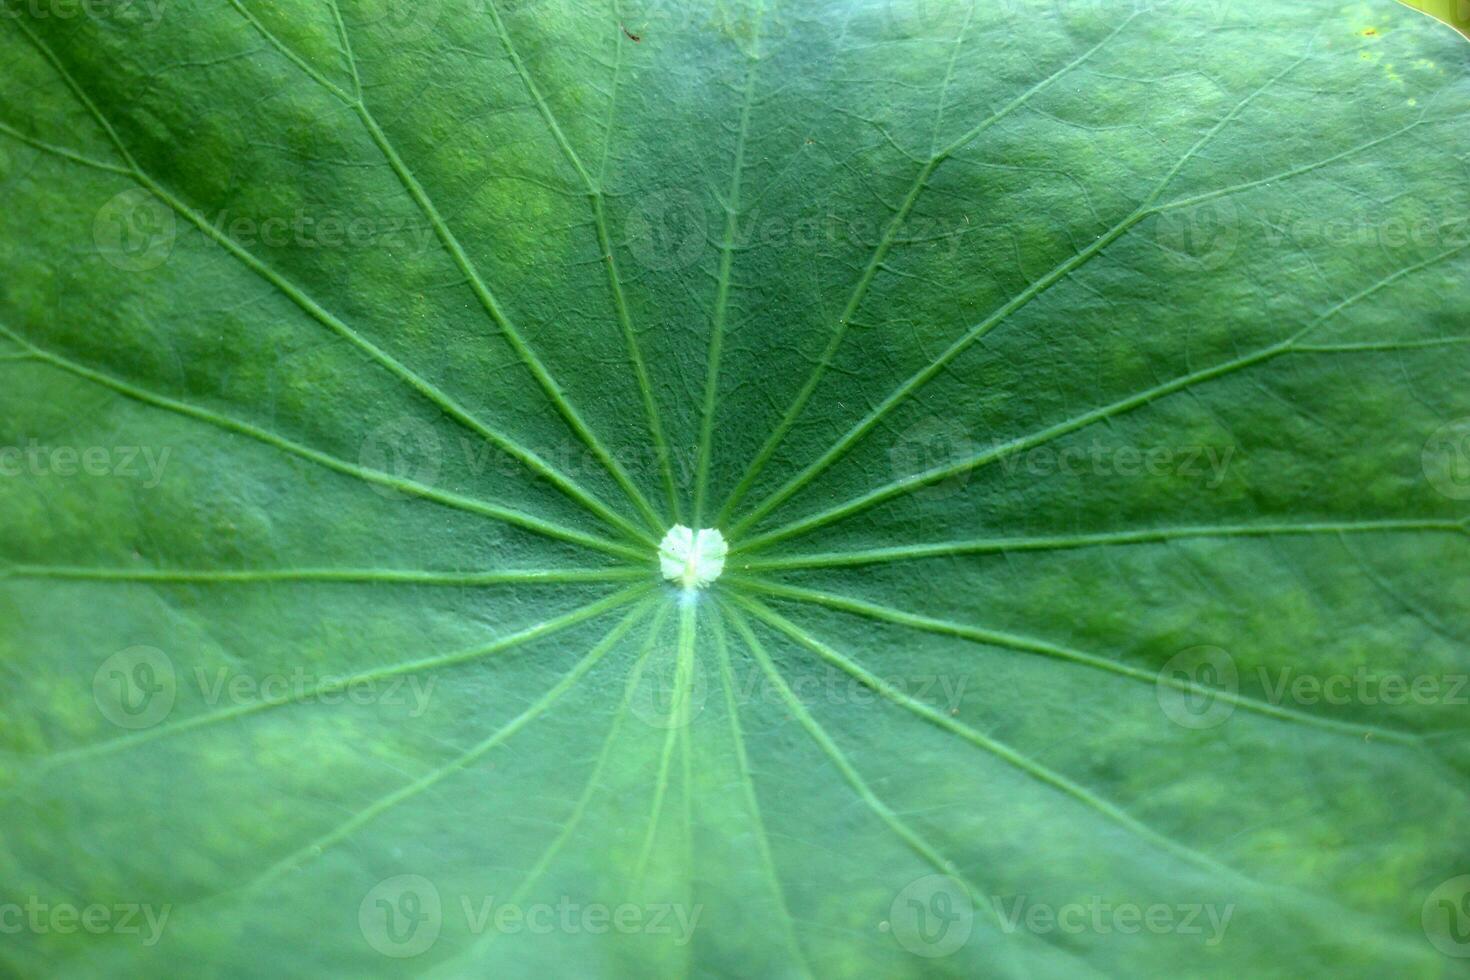 Lotus leaf with water droplets, closeup of green leaf photo